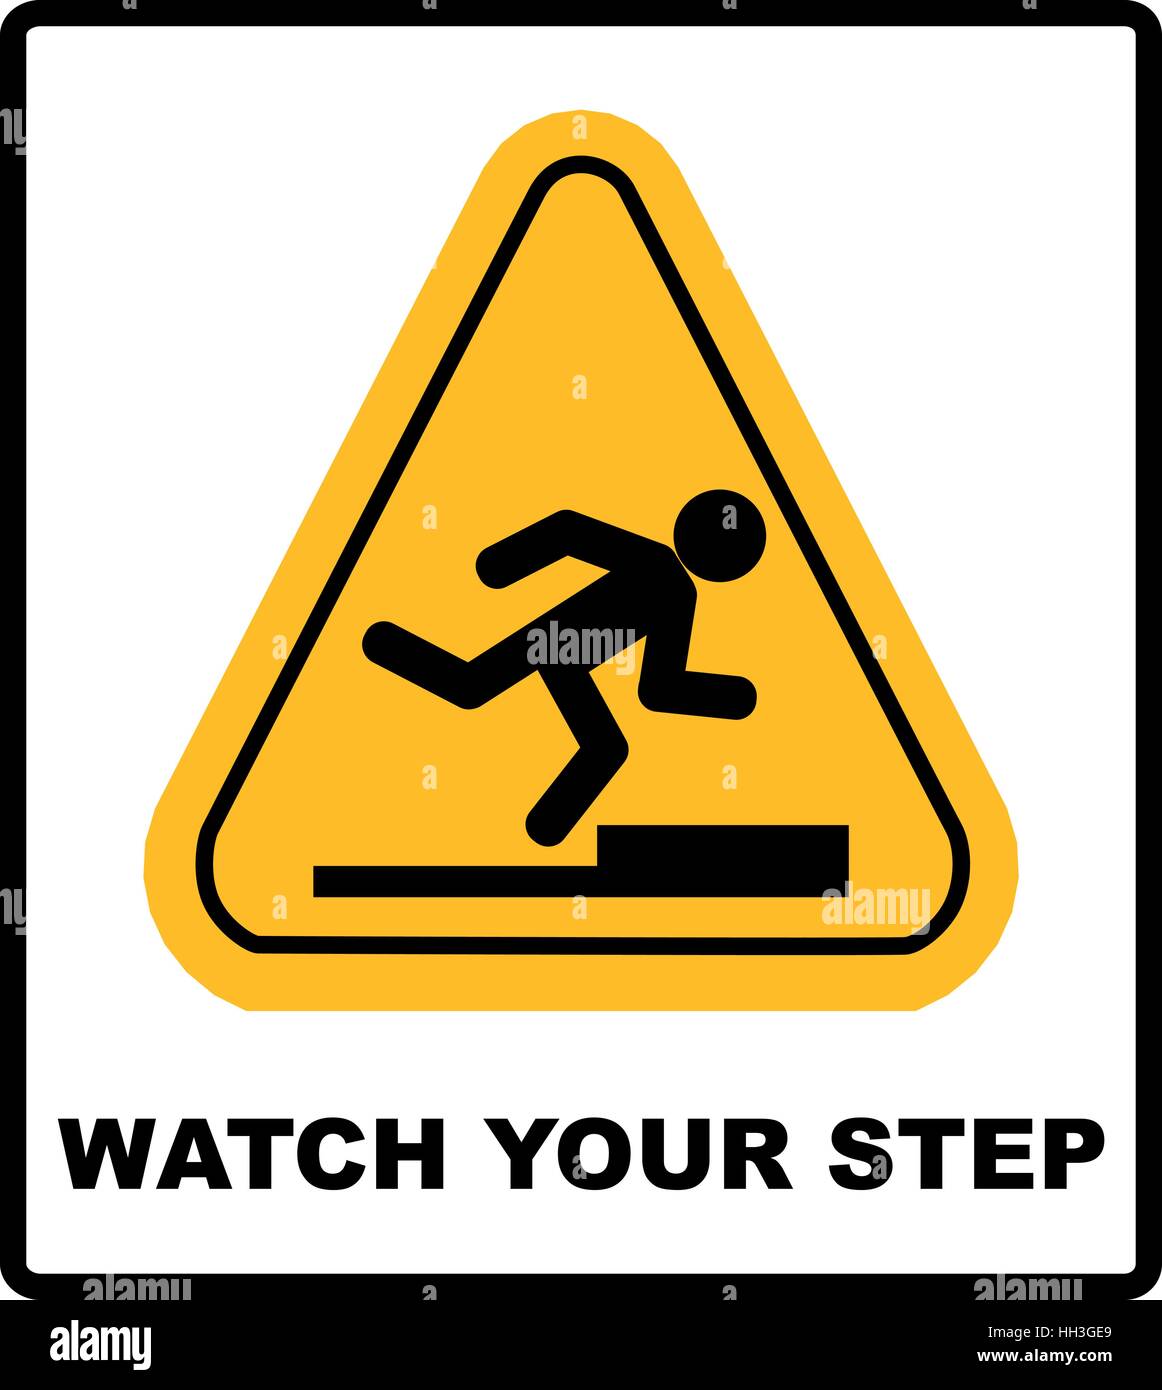 Watch your step sign. Vector yellow triangle symbol isolated on white. Warning sticker label for public places. Stock Vector